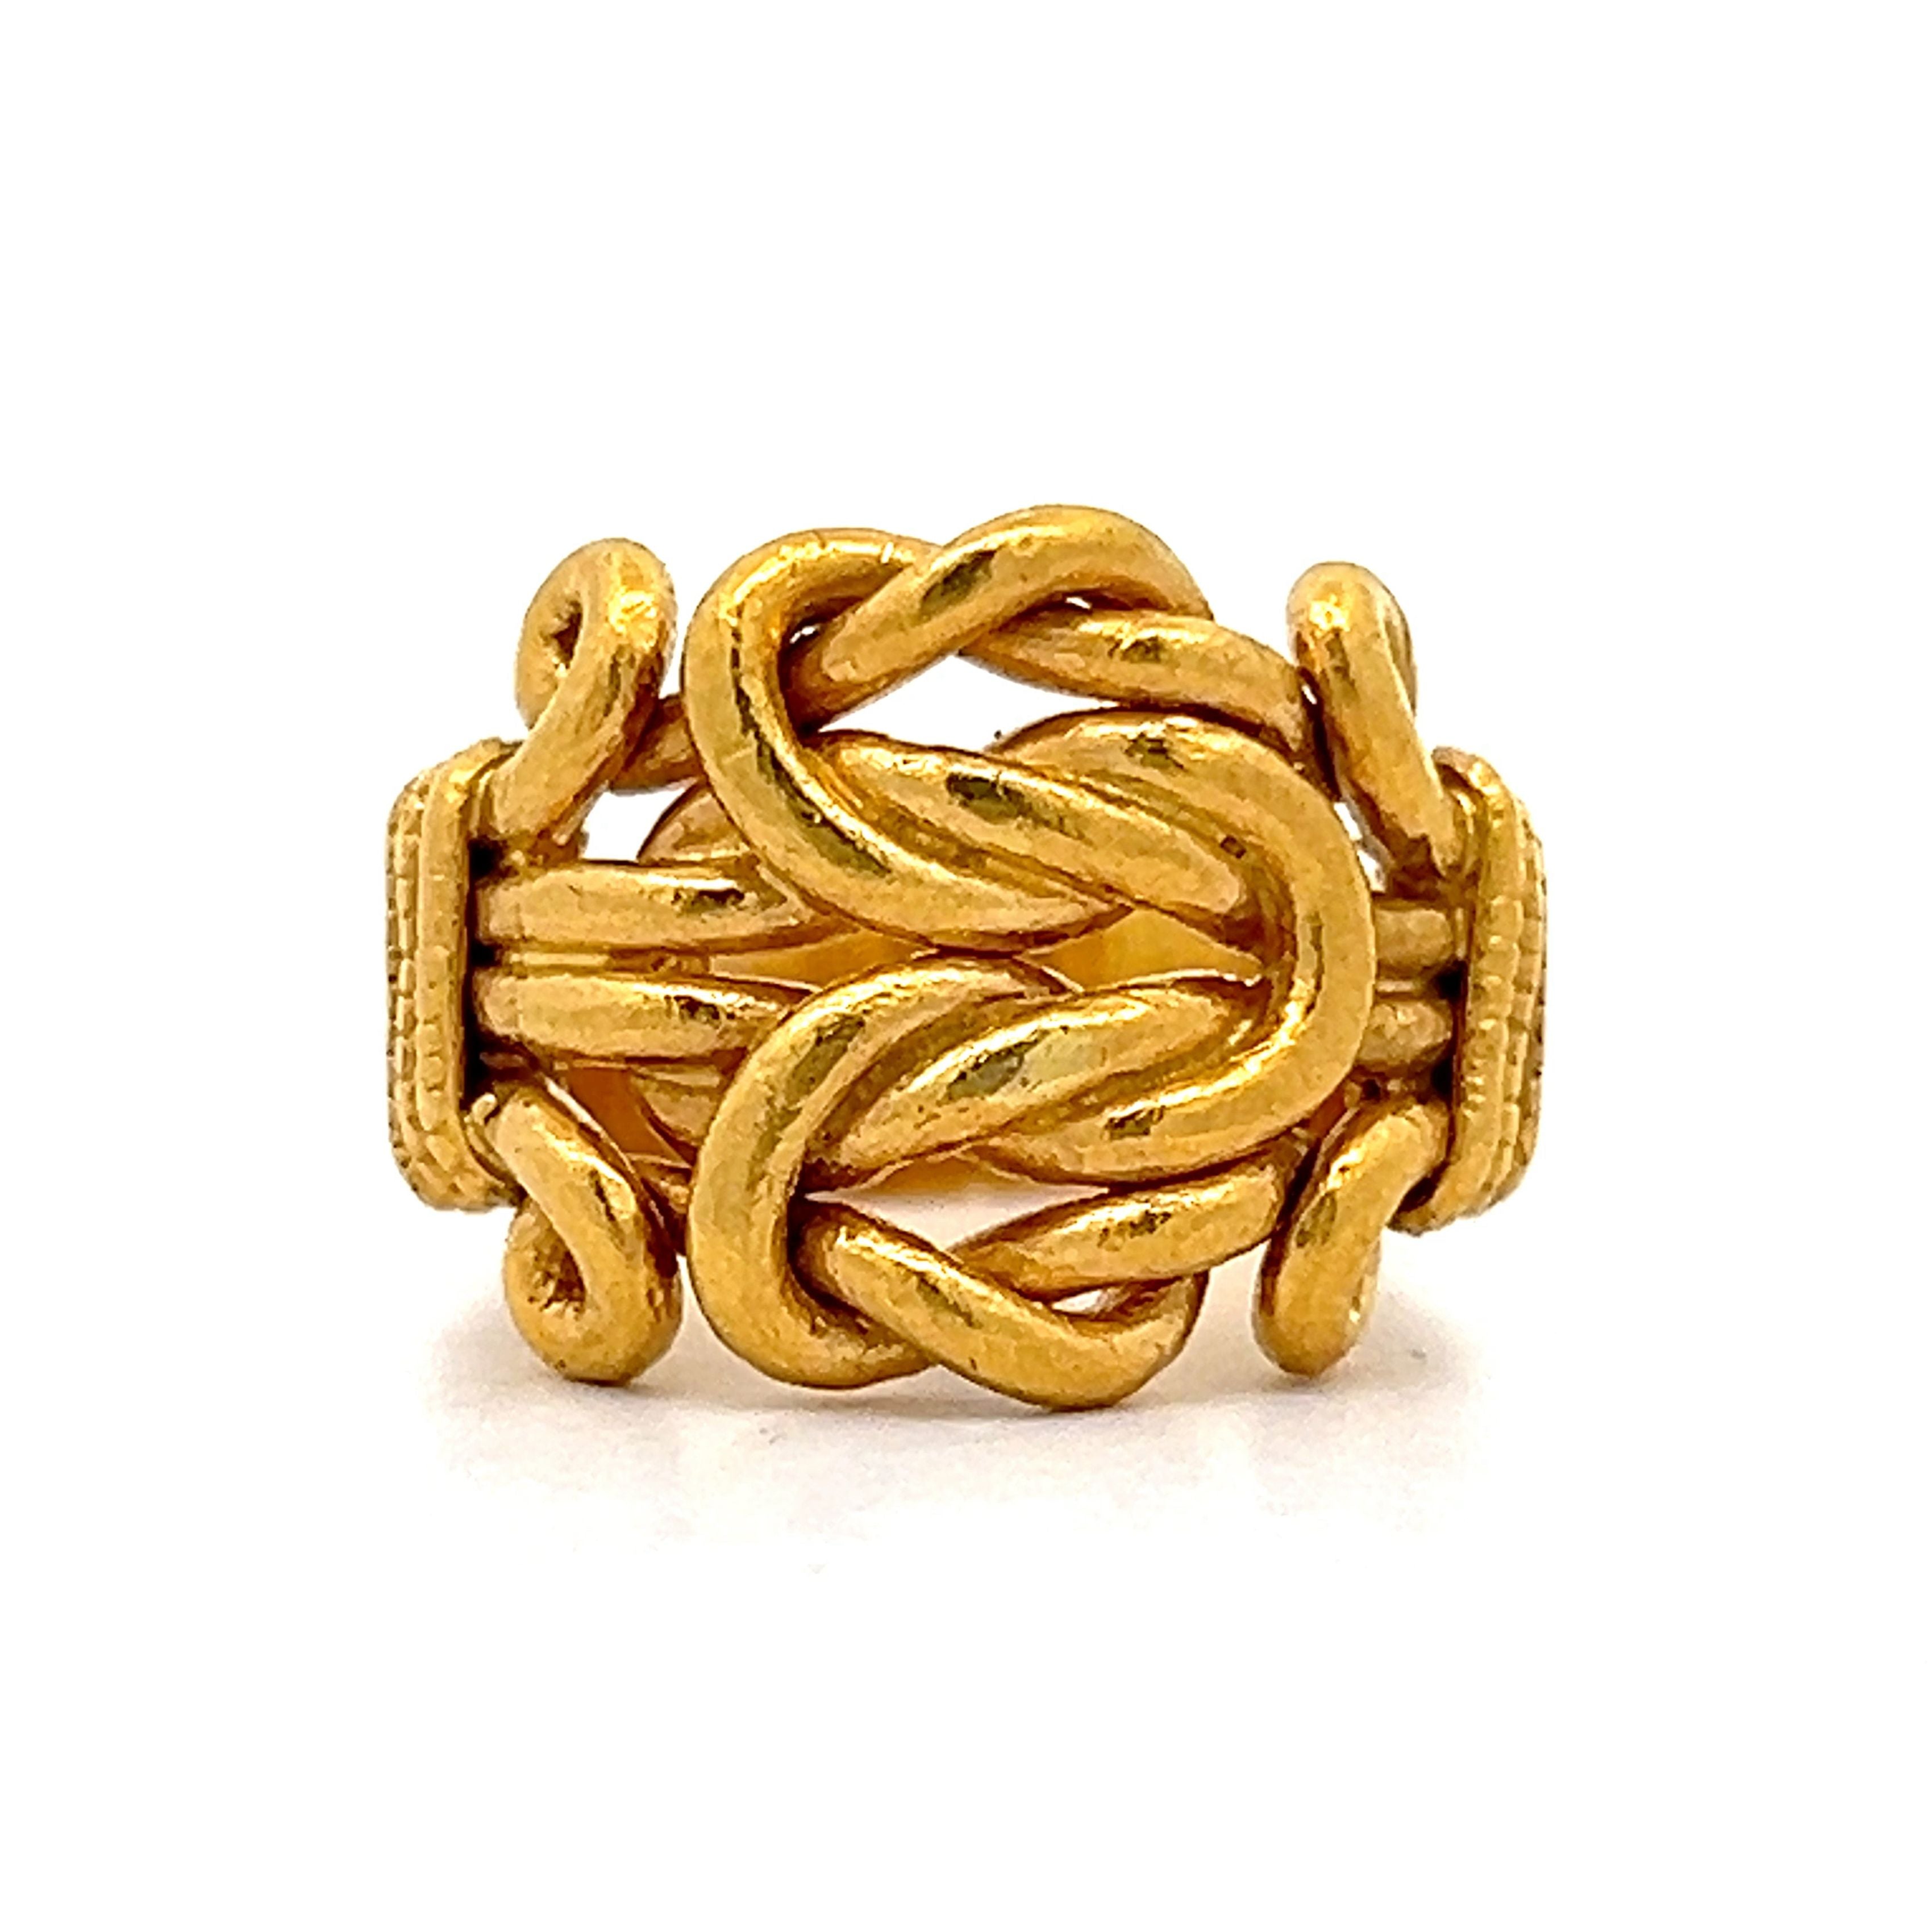 Vintage Victorian Knot Ring in 24k Yellow Gold - Filigree Jewelers